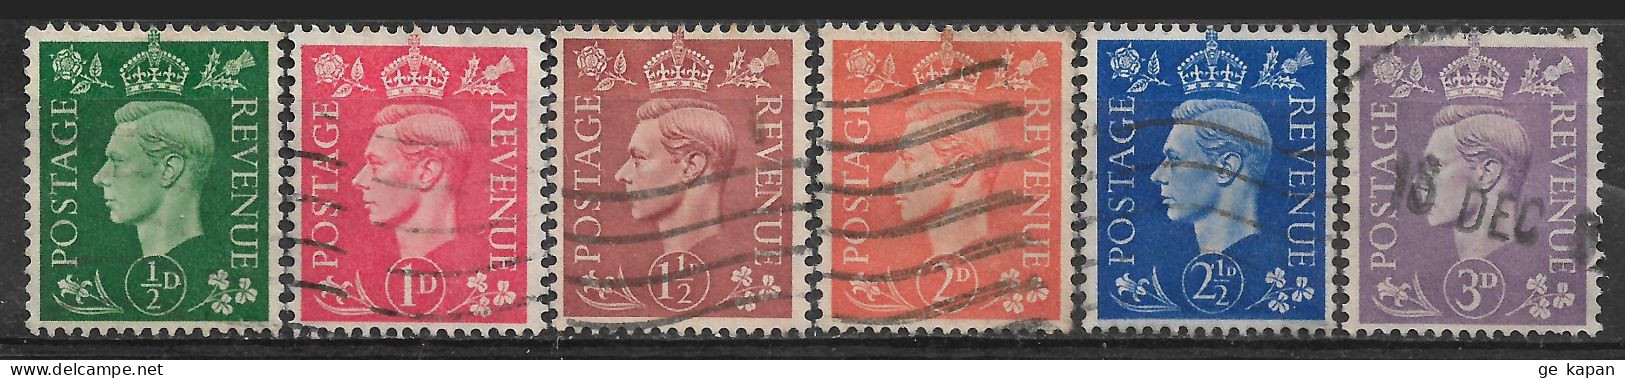 1941-1942 GREAT BRITAIN Complete Set Of 6 Used Stamps (Scott # 258-263) CV $3.30 - Usati